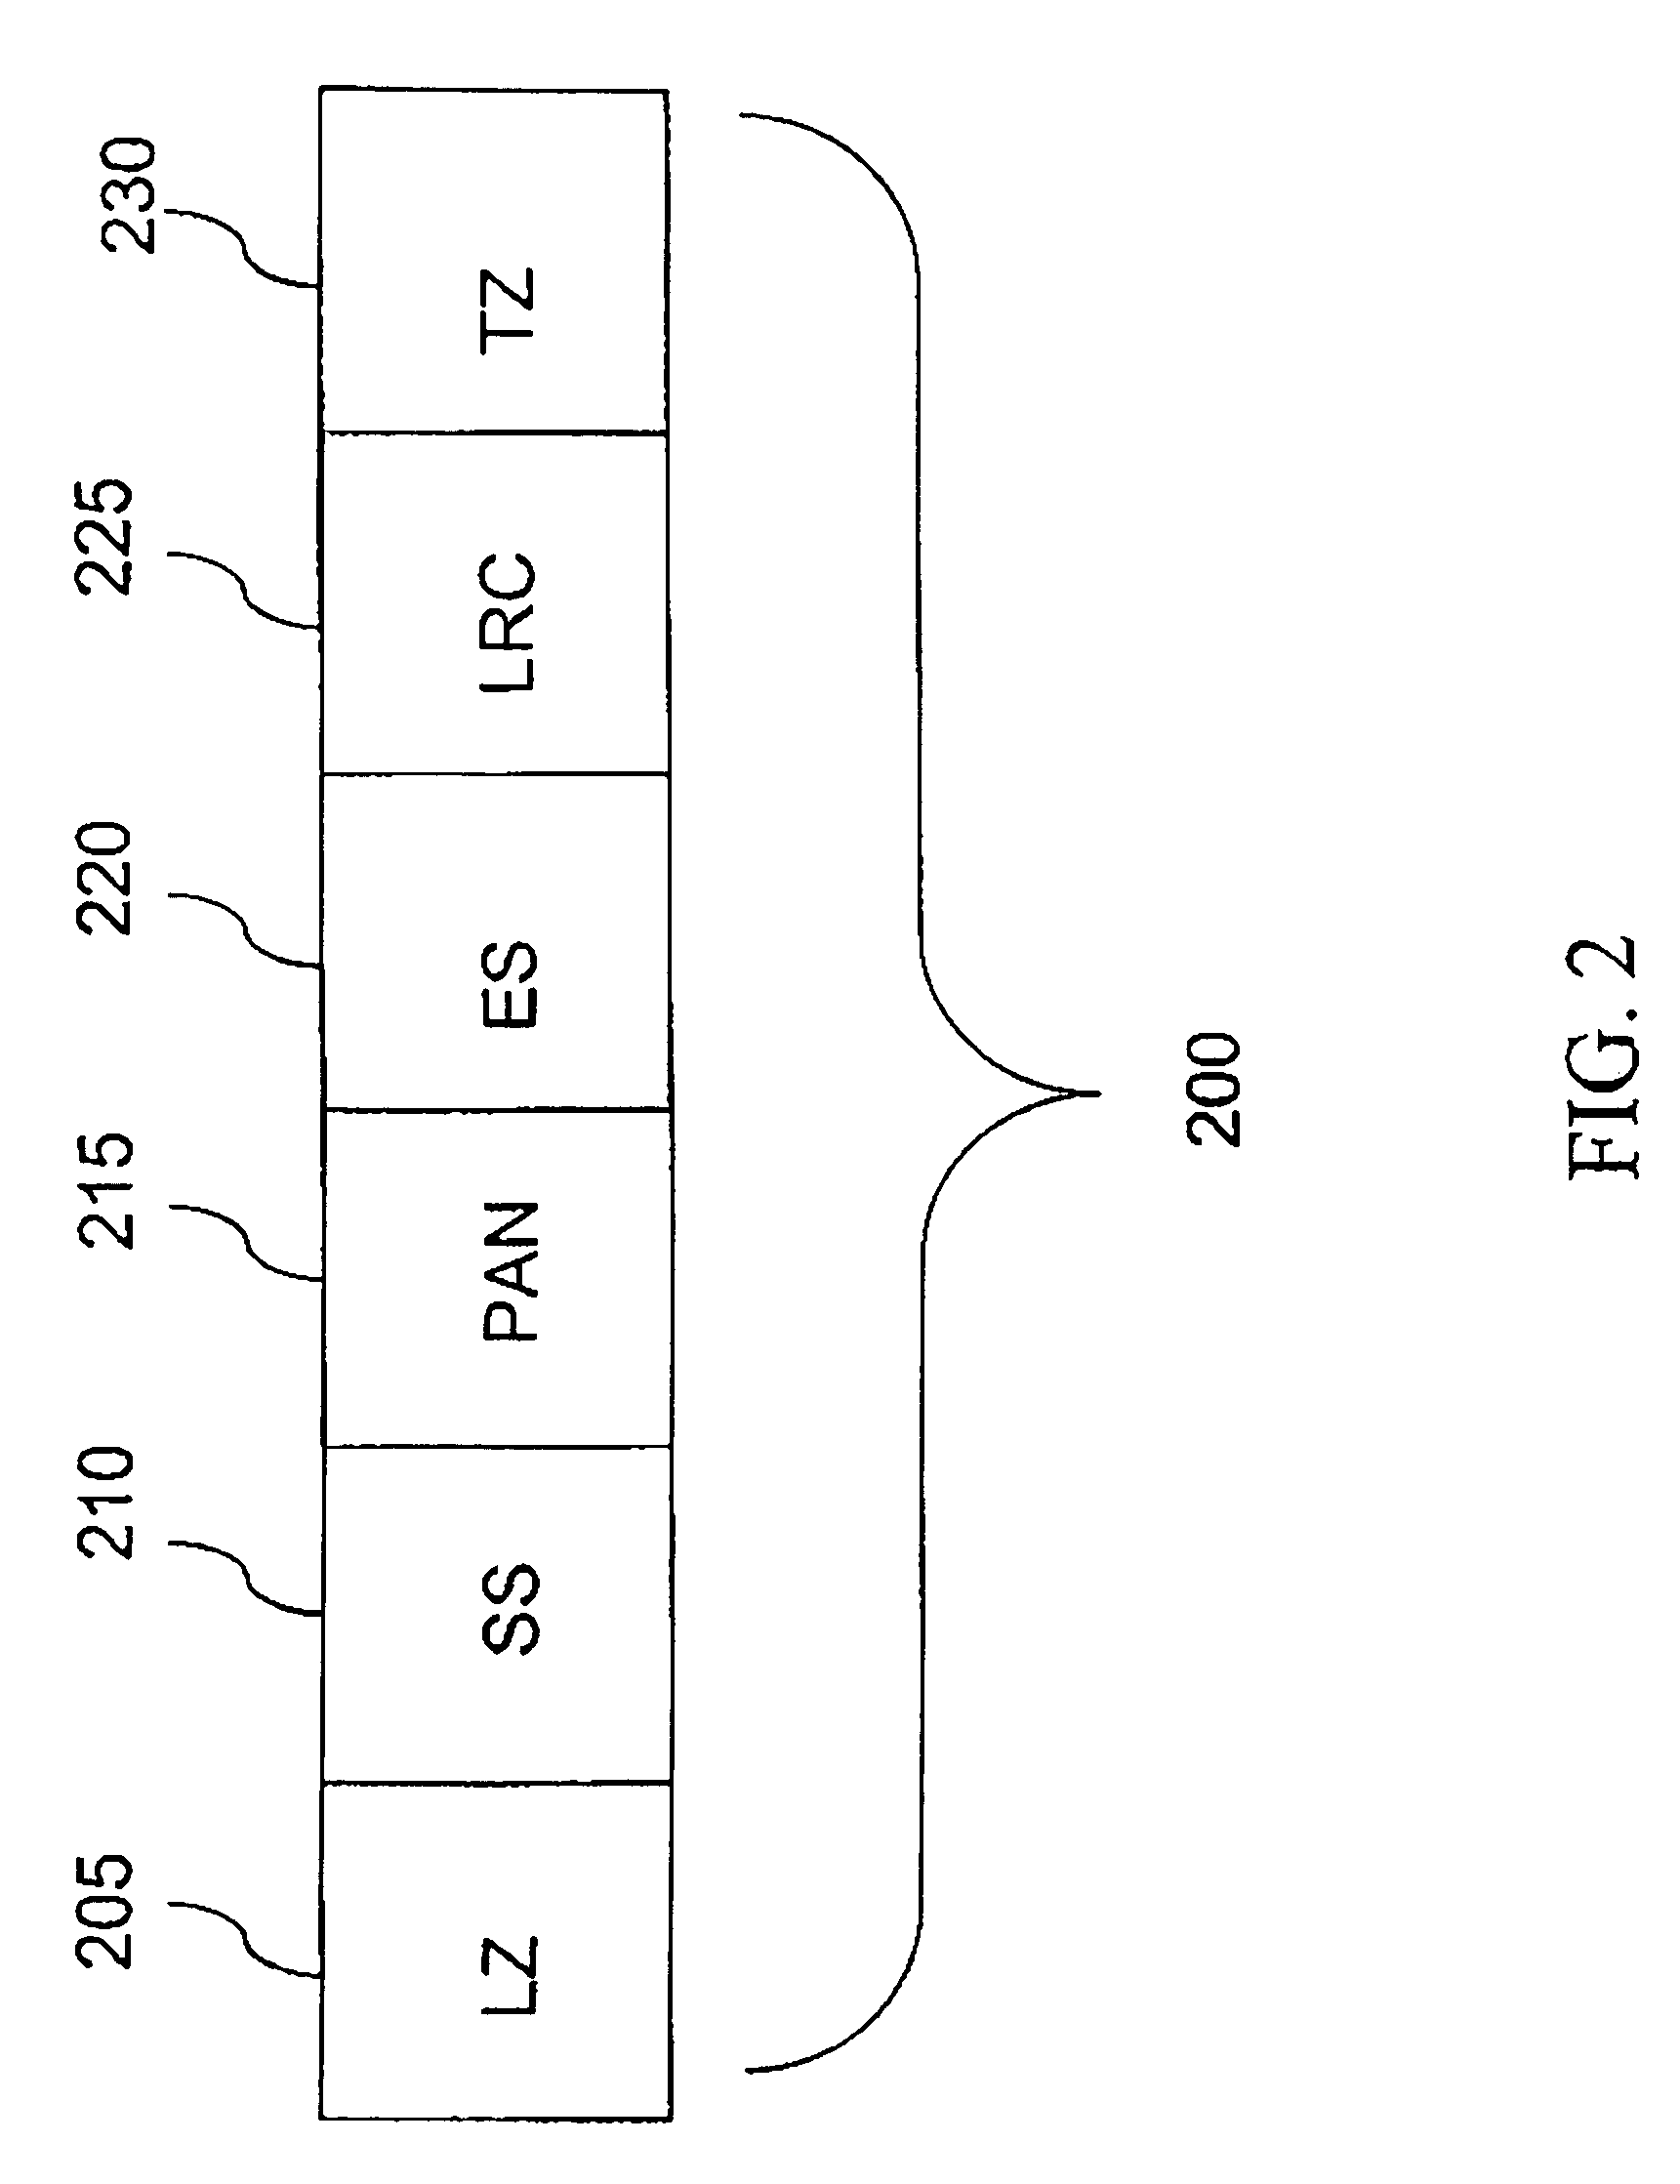 Method and apparatus for authenticating a magnetic fingerprint signal using a filter capable of isolating a remanent noise related signal component